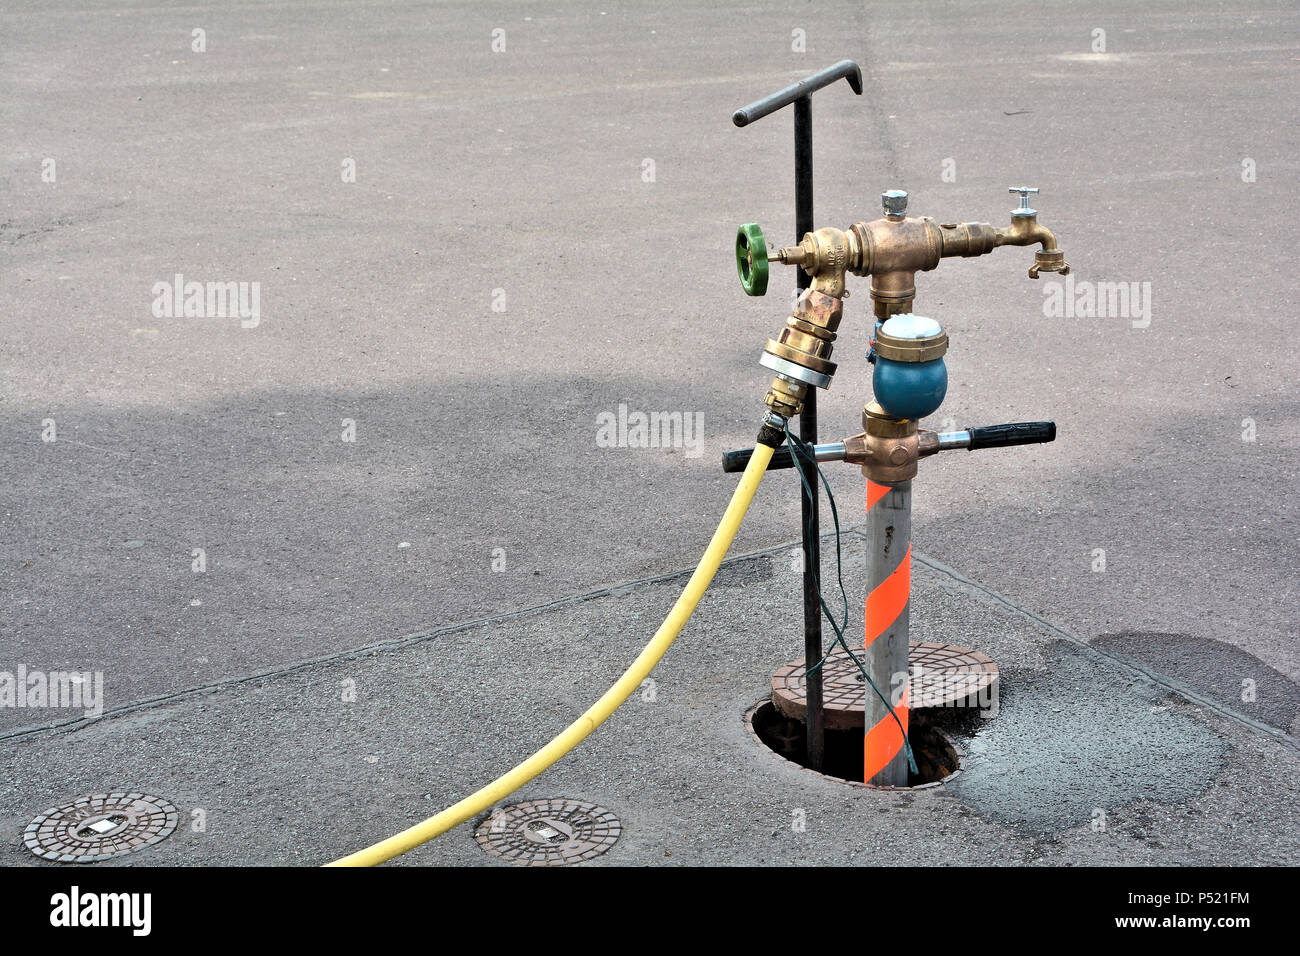 Water supply through a hydrant Stock Photo